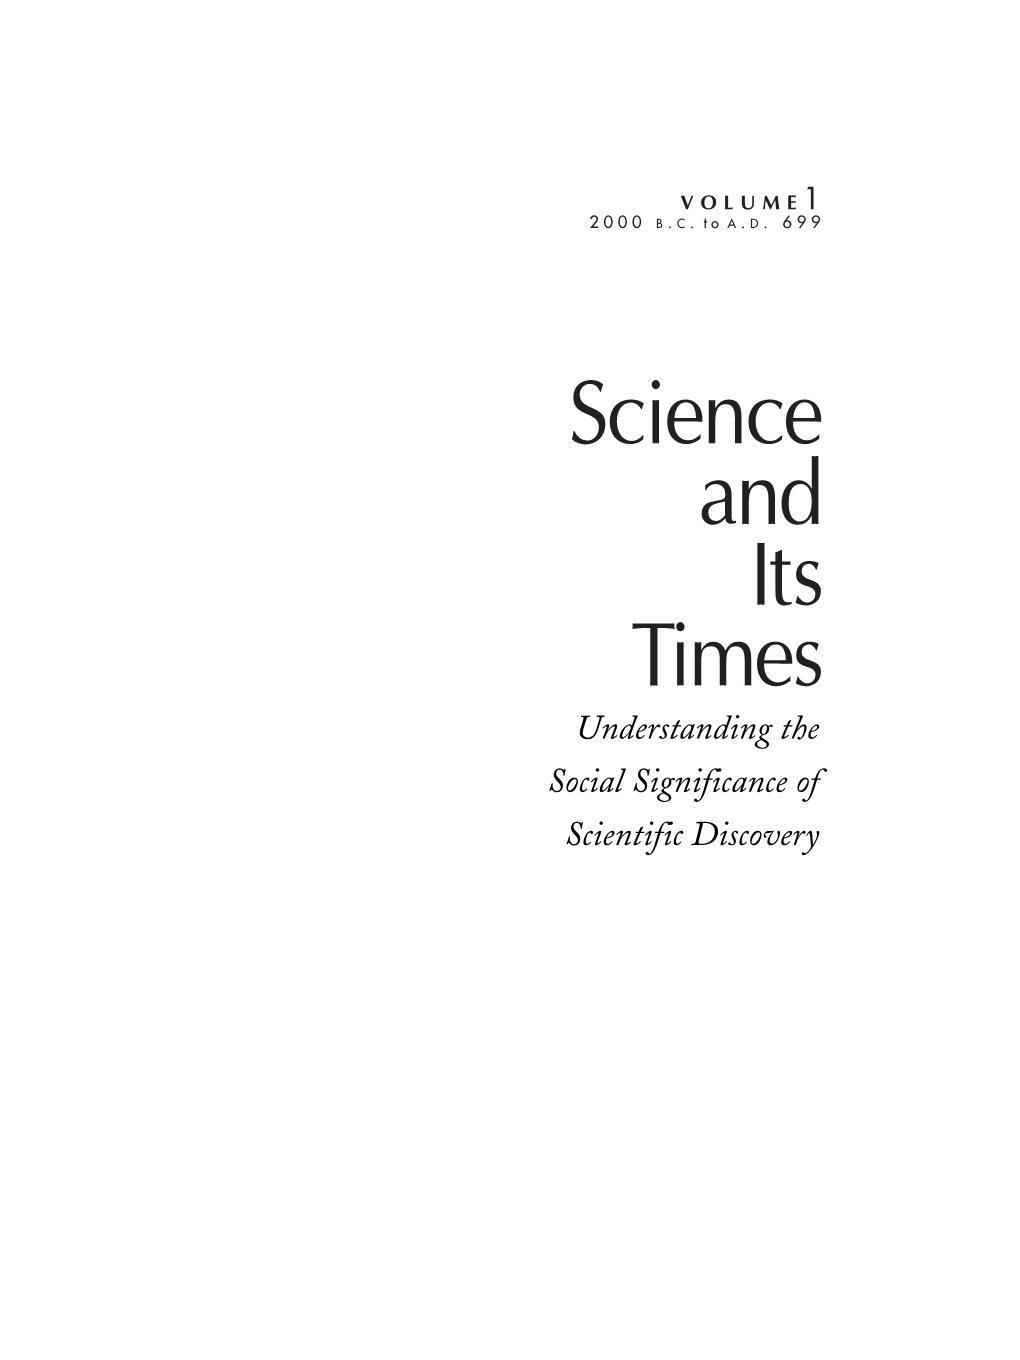 Science and Its Times Understanding the Social Significance of Scientific Discovery Saitvol1 Htp/Tp 3/5/01 1:43 PM Page 3